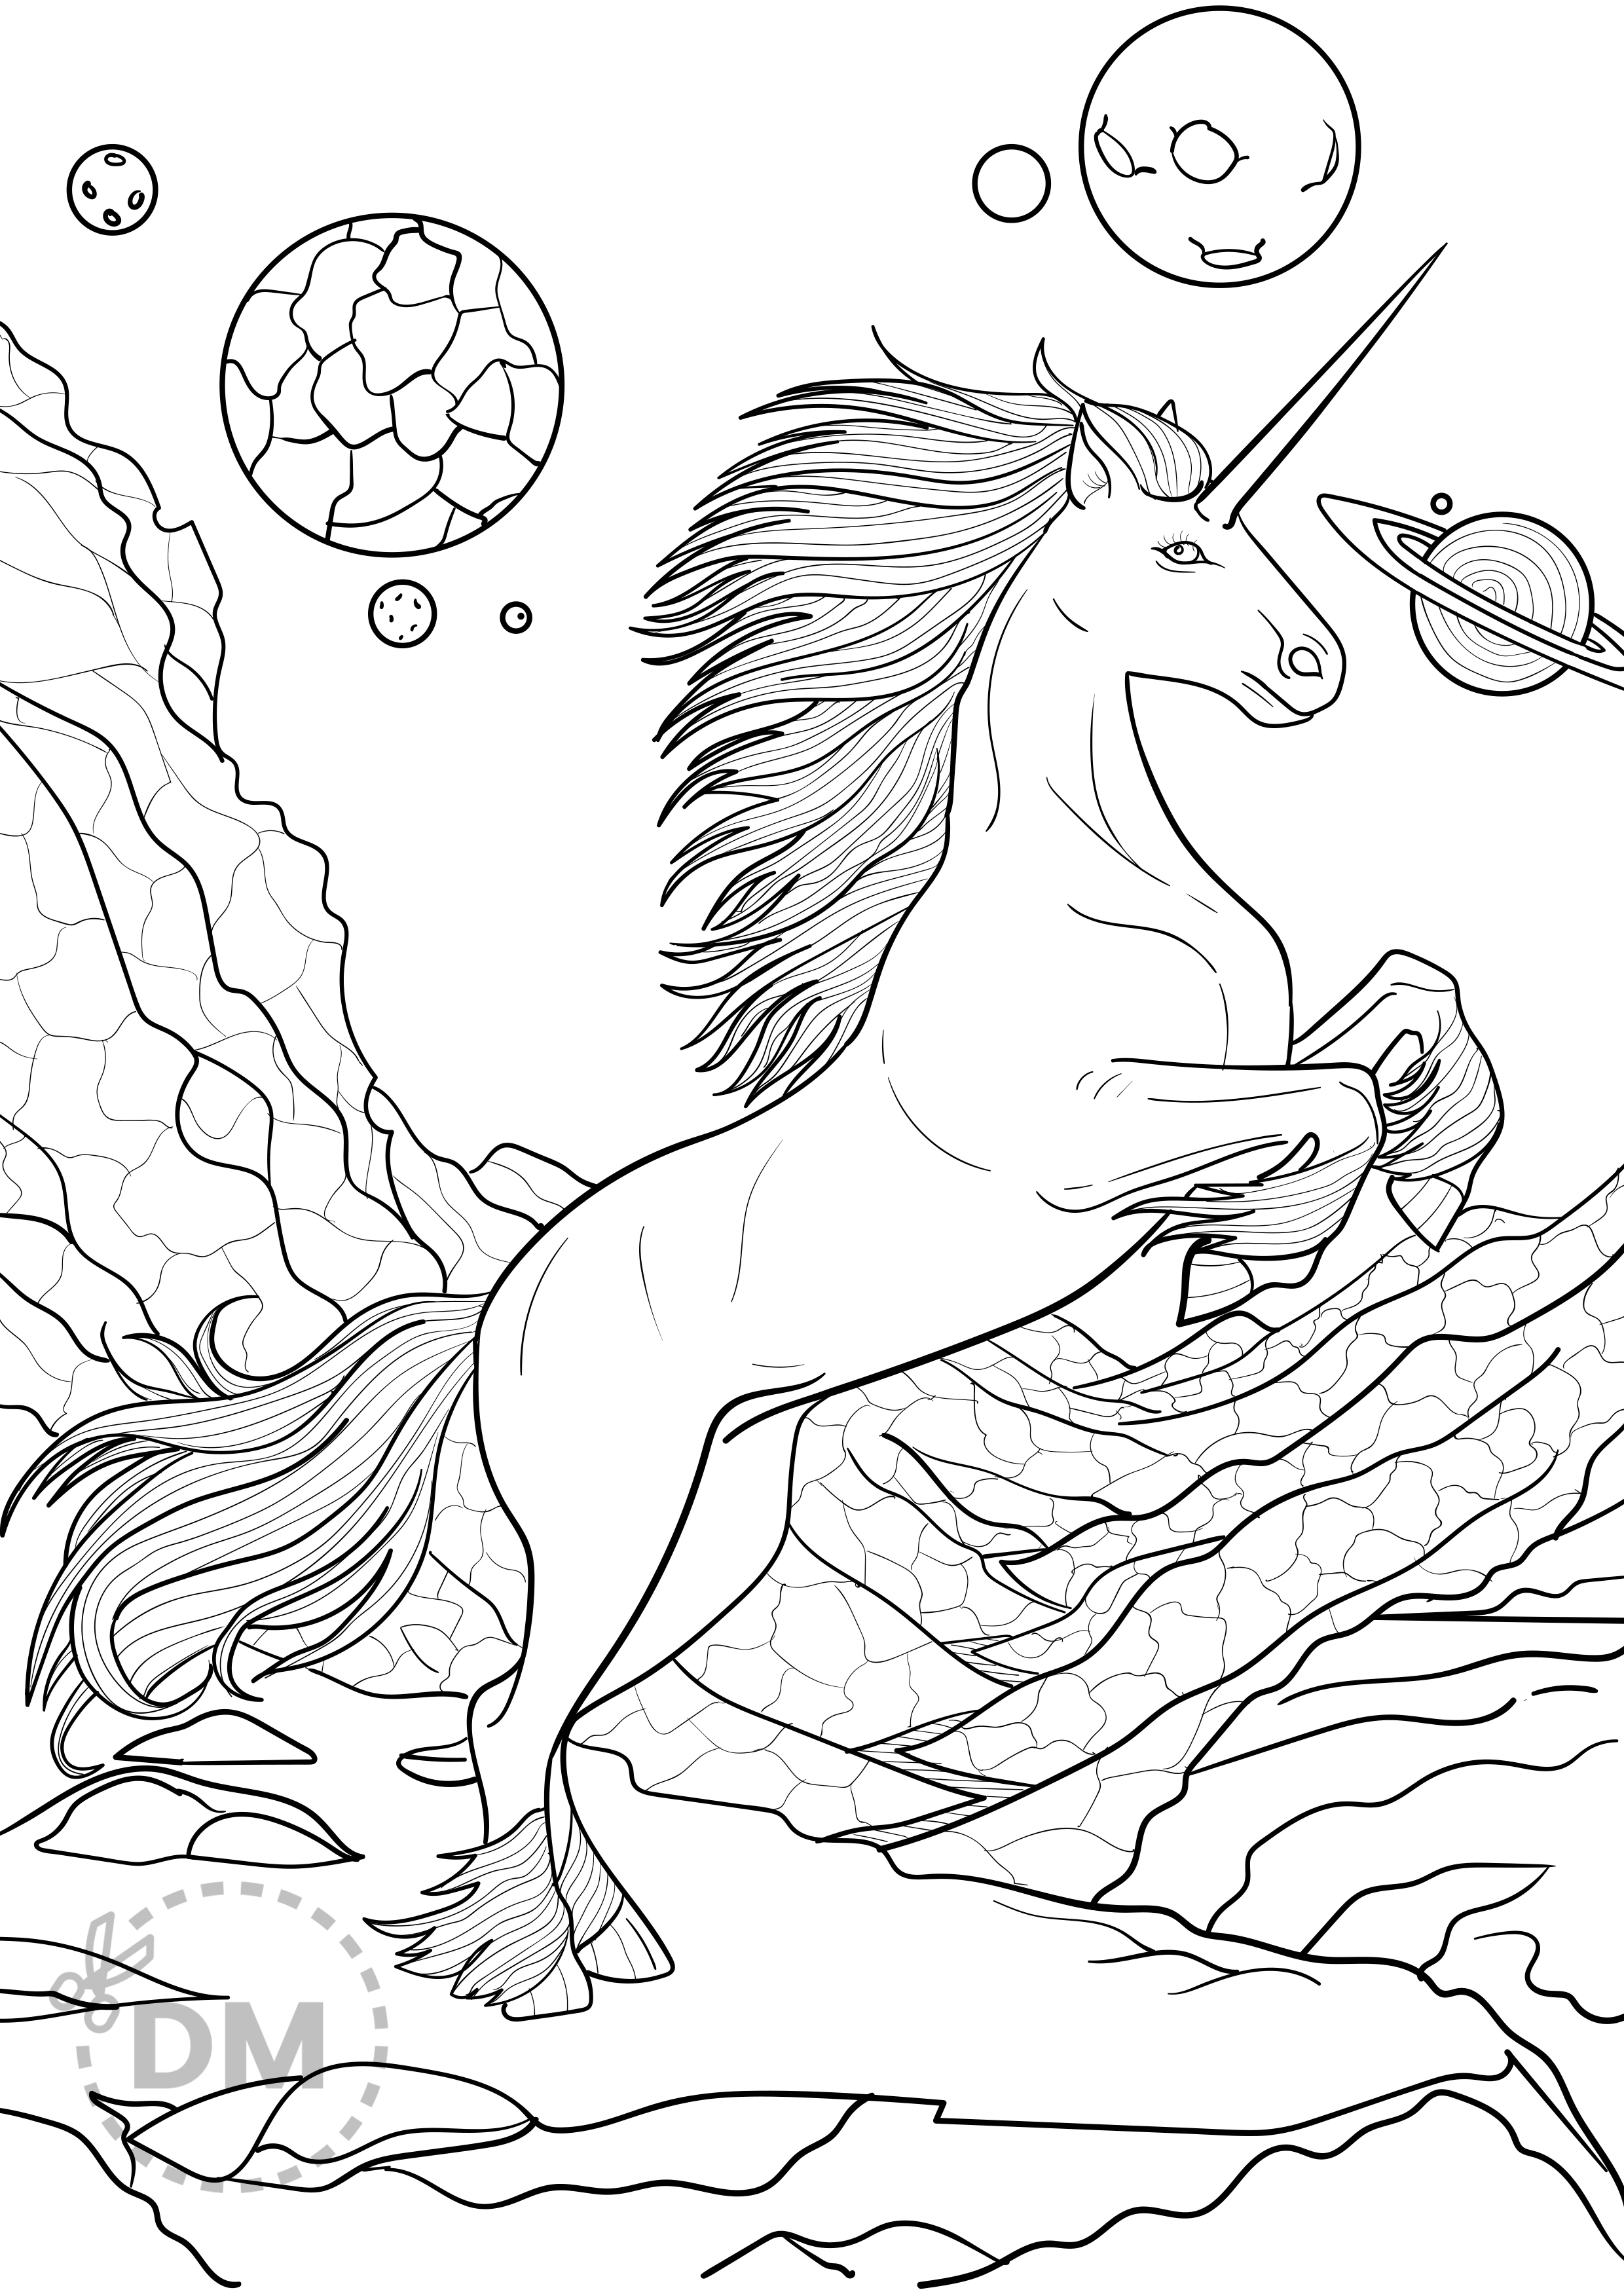 Unicorn coloring page for adults printable page for download